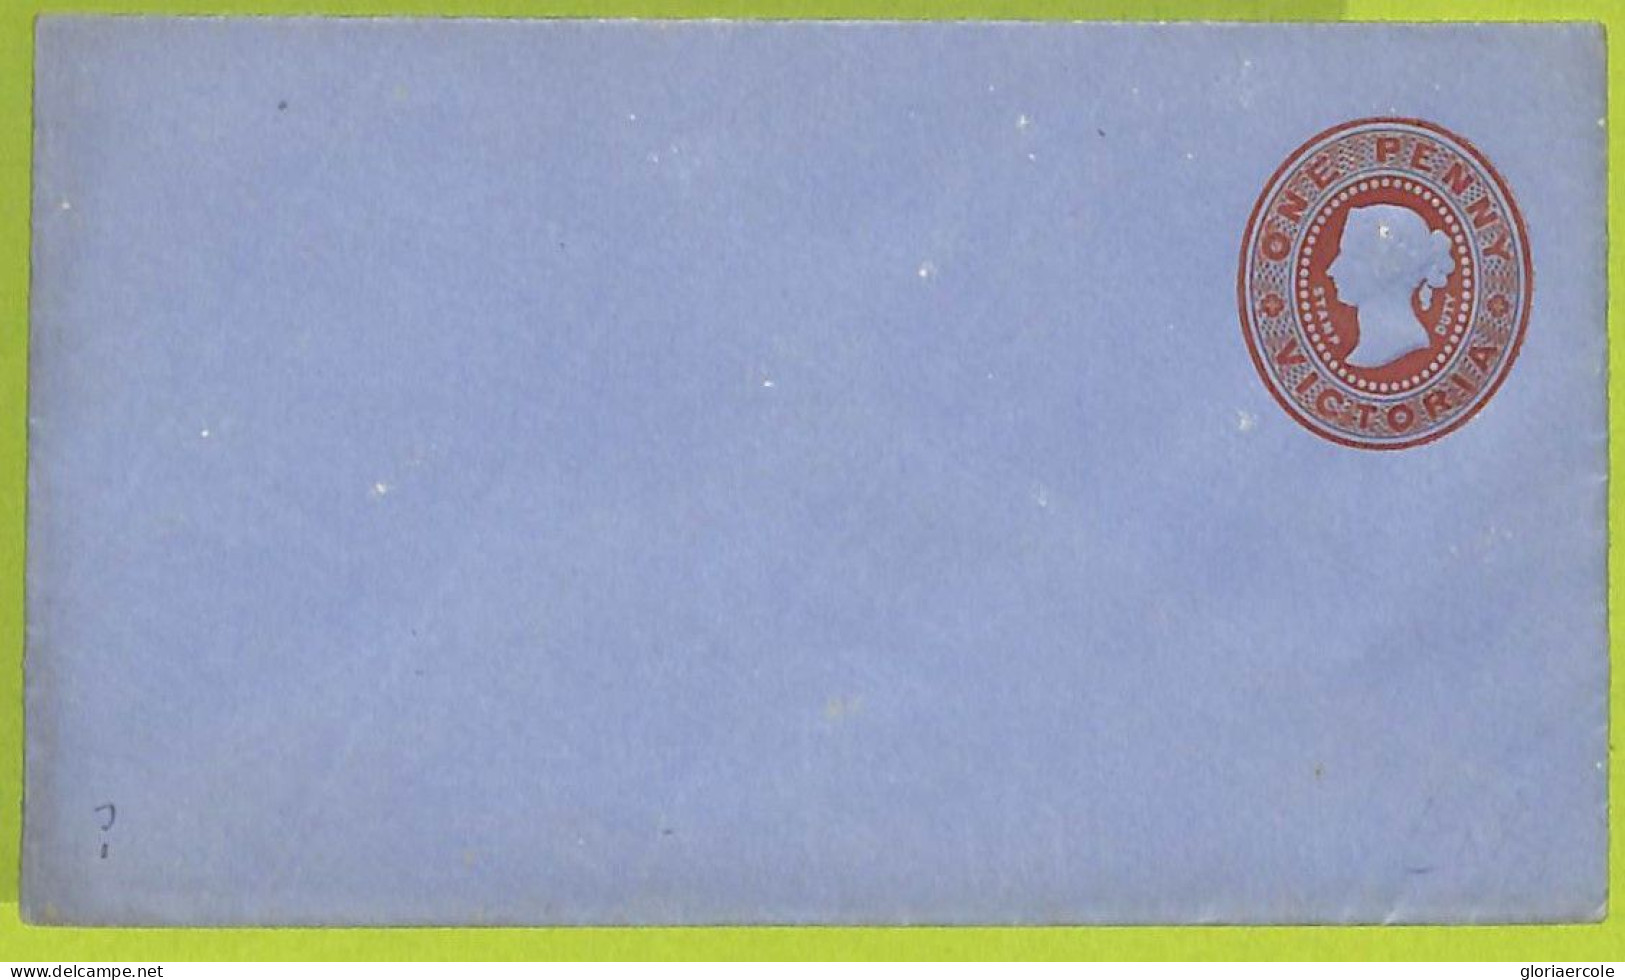 40206 - VICTORIA - Postal History - STATIONERY COVER Printed To Order BLUE LAID PAPER 1 P - 136*78 - Briefe U. Dokumente